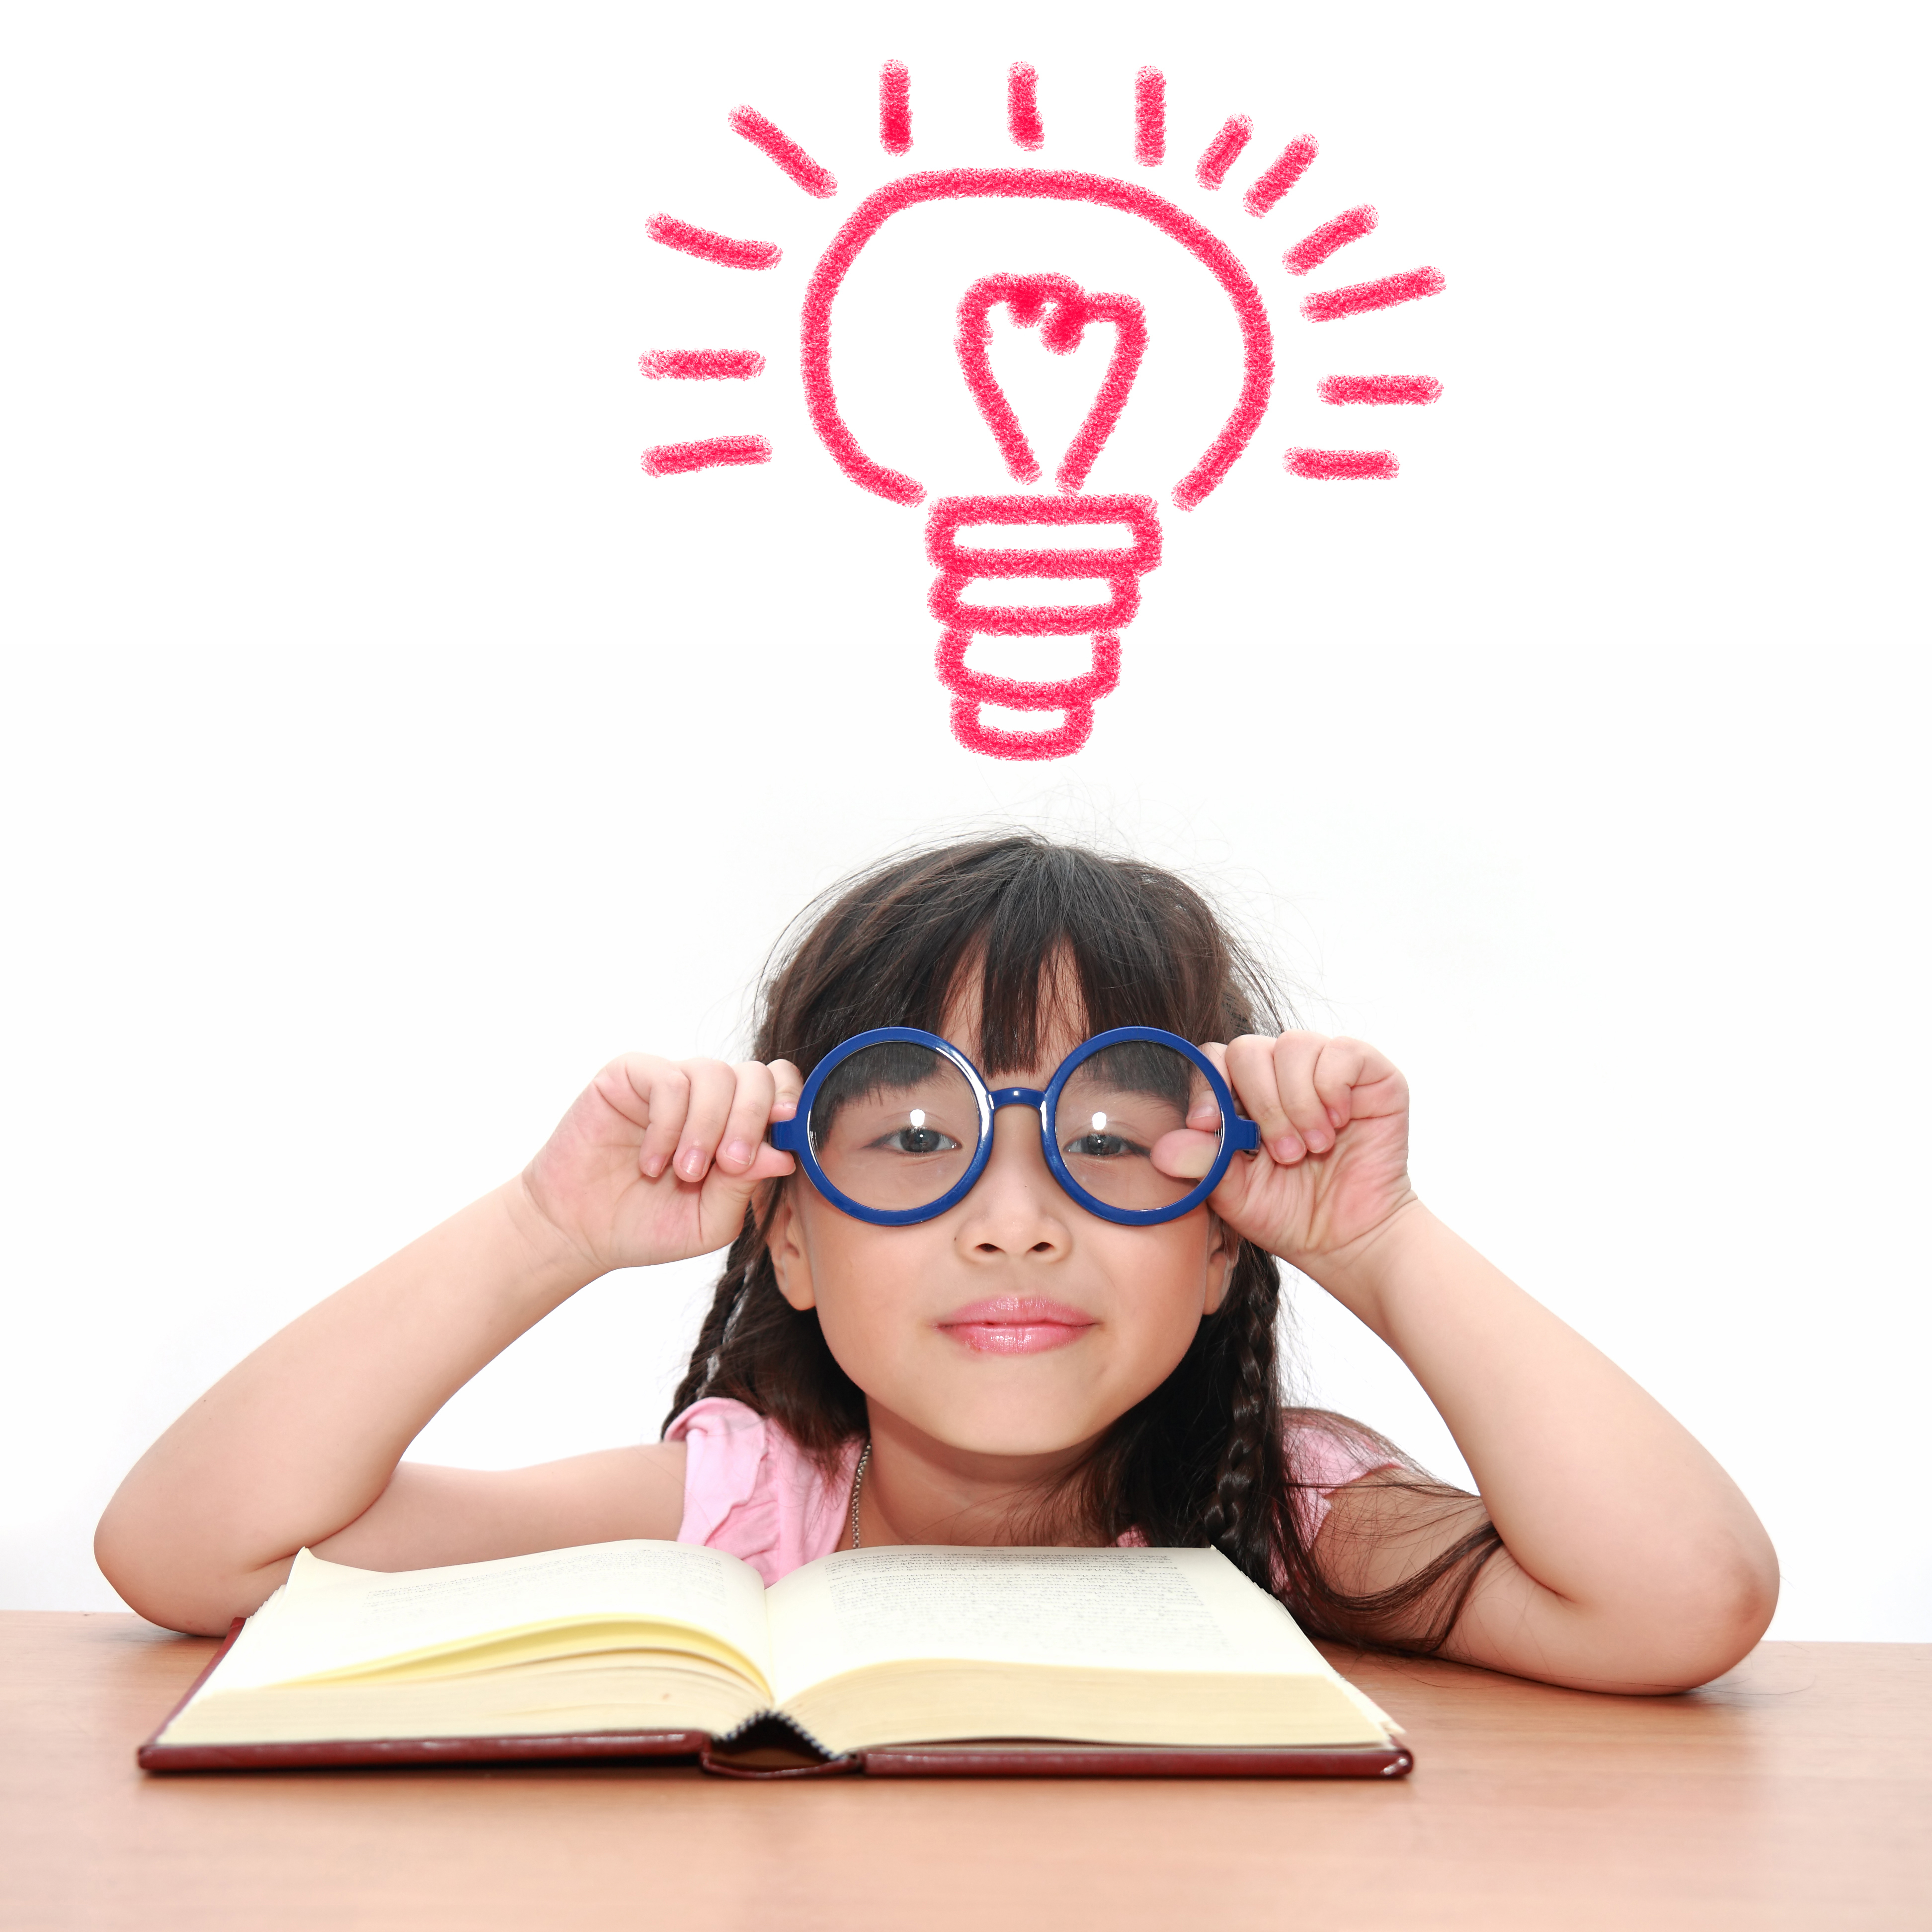 A girl with glasses reading a book with a drawn lighbulb over her head